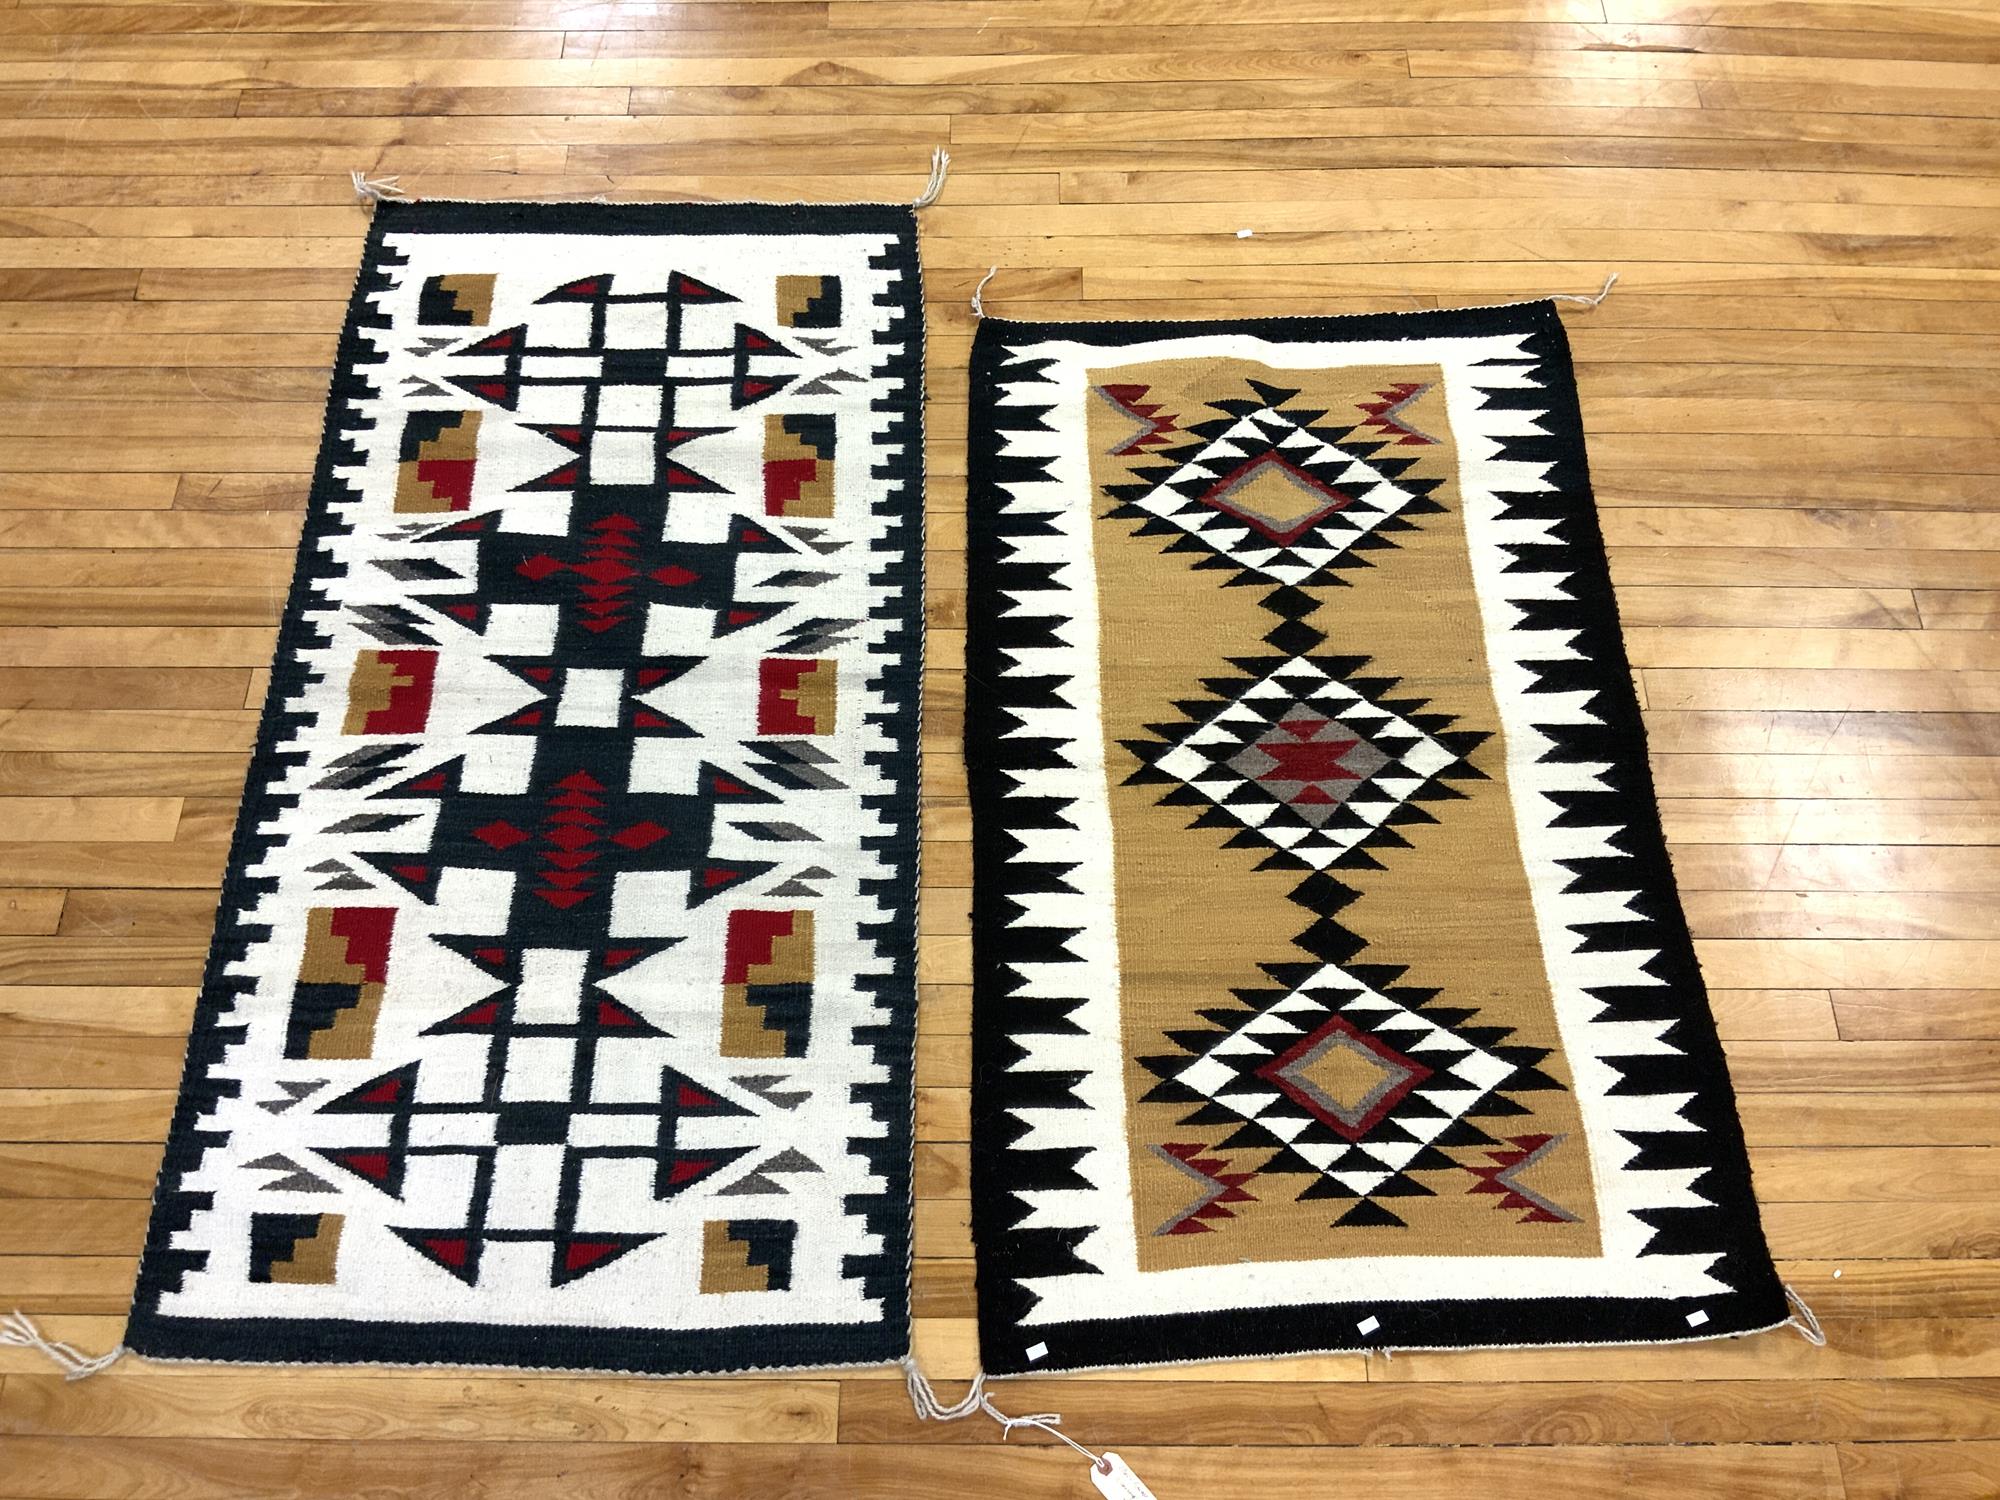 TWO 20TH C NAVAJO RUGS Both have 3ac987